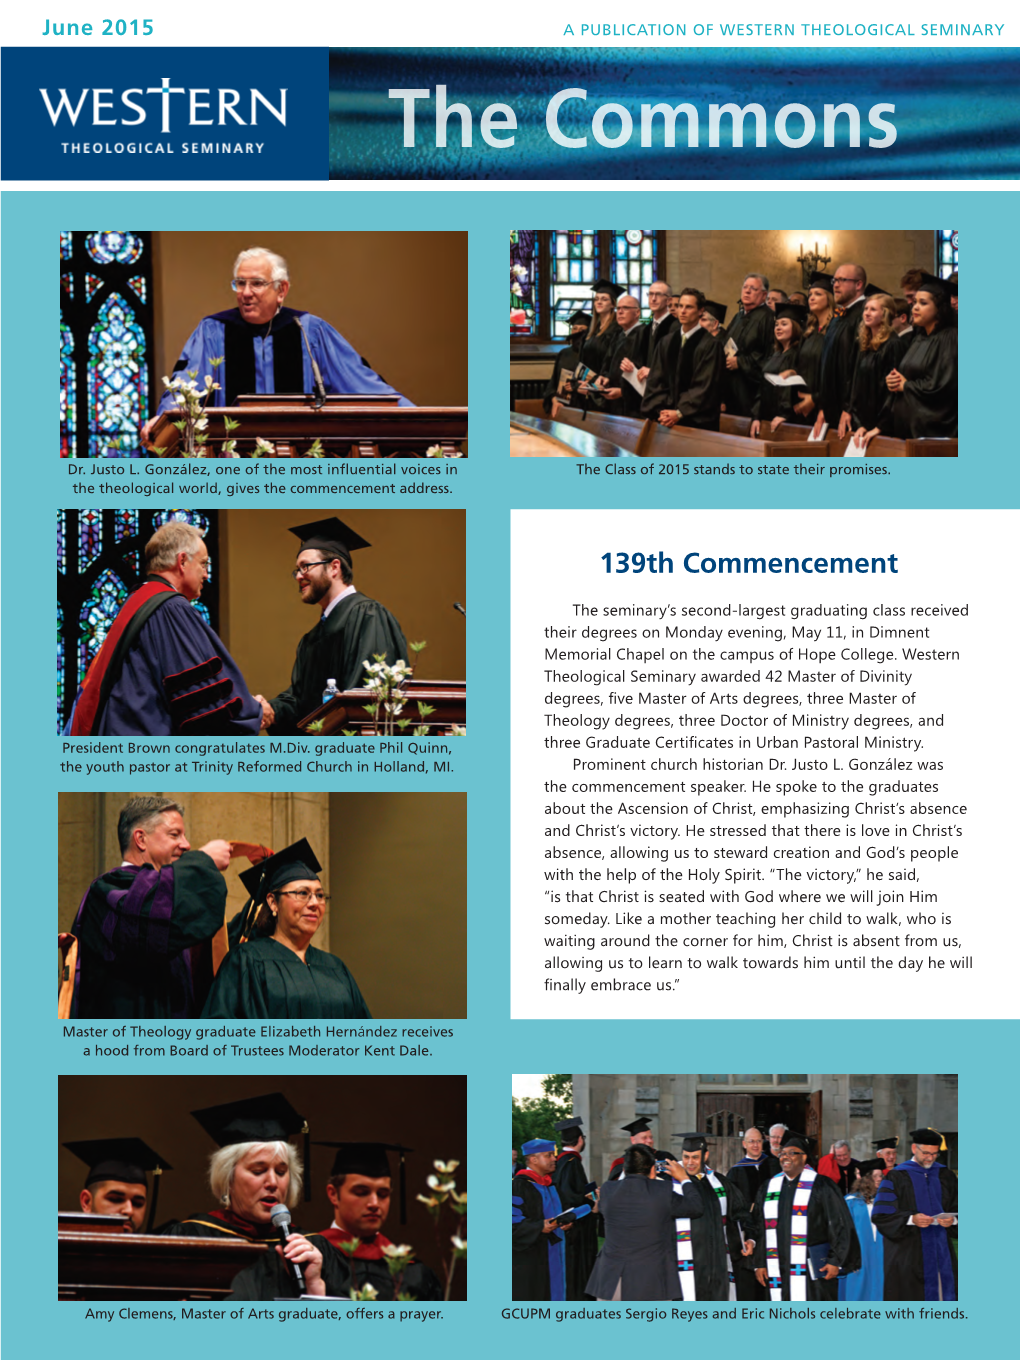 June 2015 a PUBLICATION of WESTERN THEOLOGICAL SEMINARY the Commons